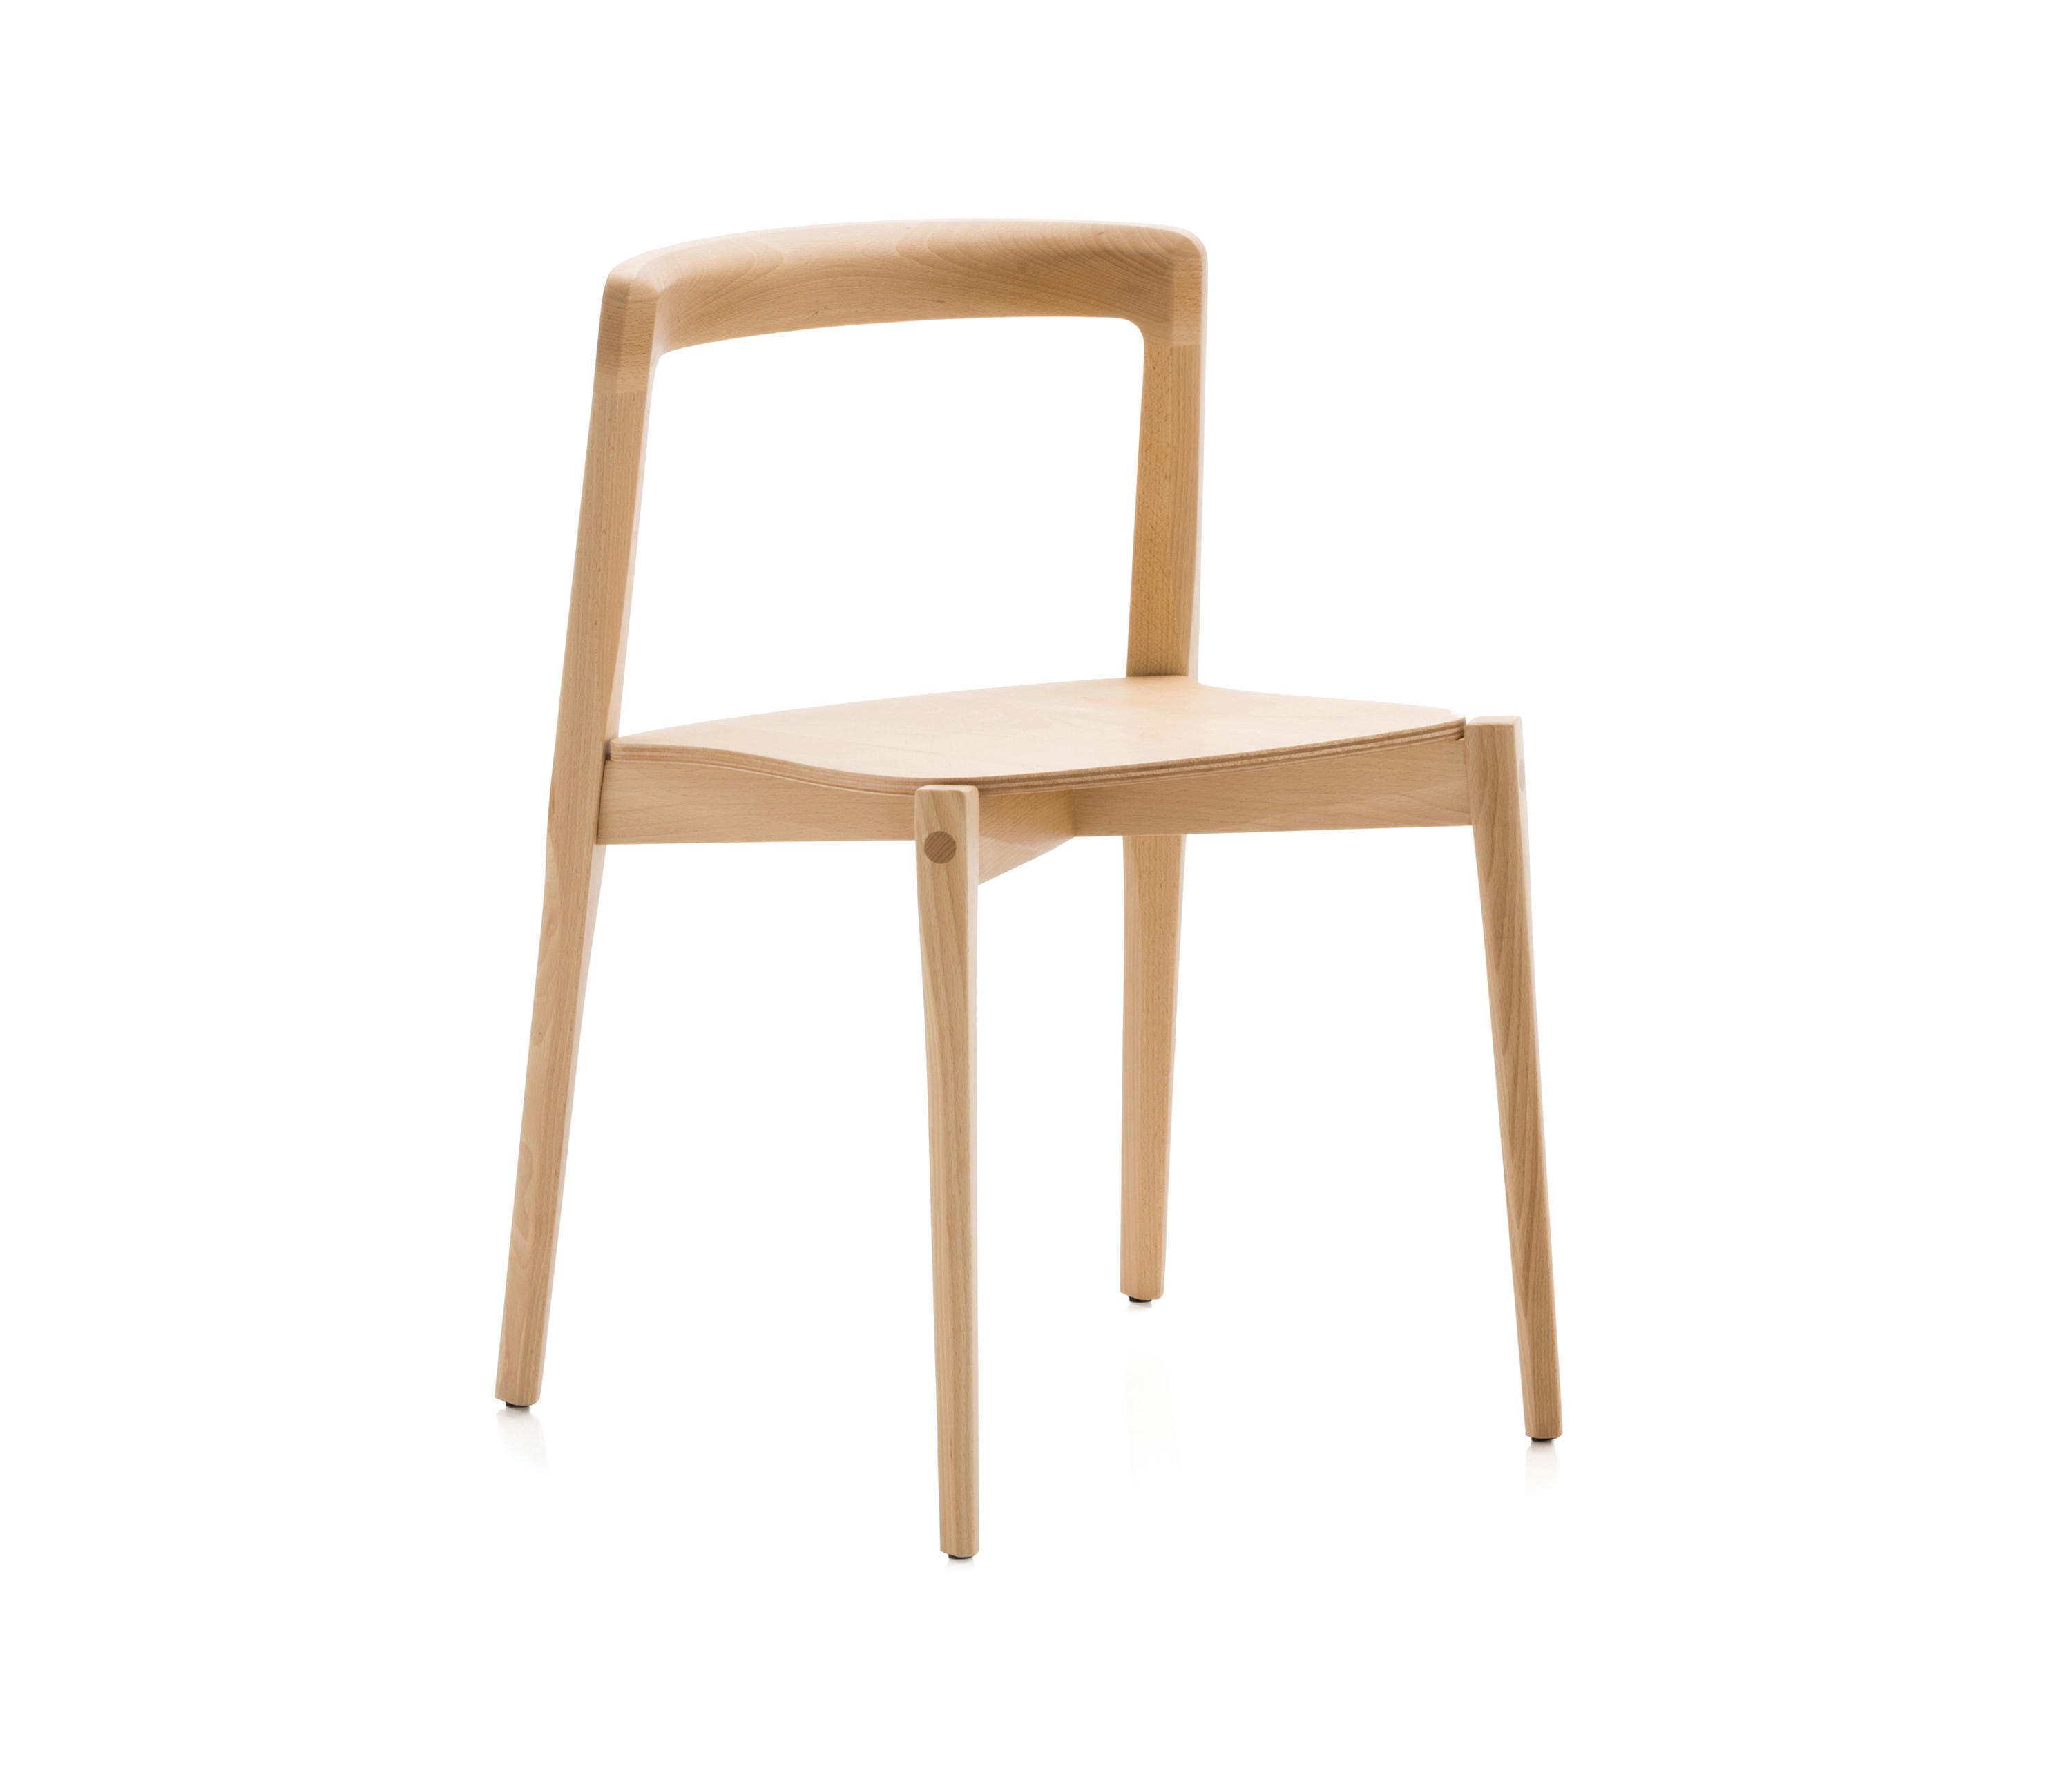 HELIX - Visitors chairs / Side chairs from B-LINE | Architonic